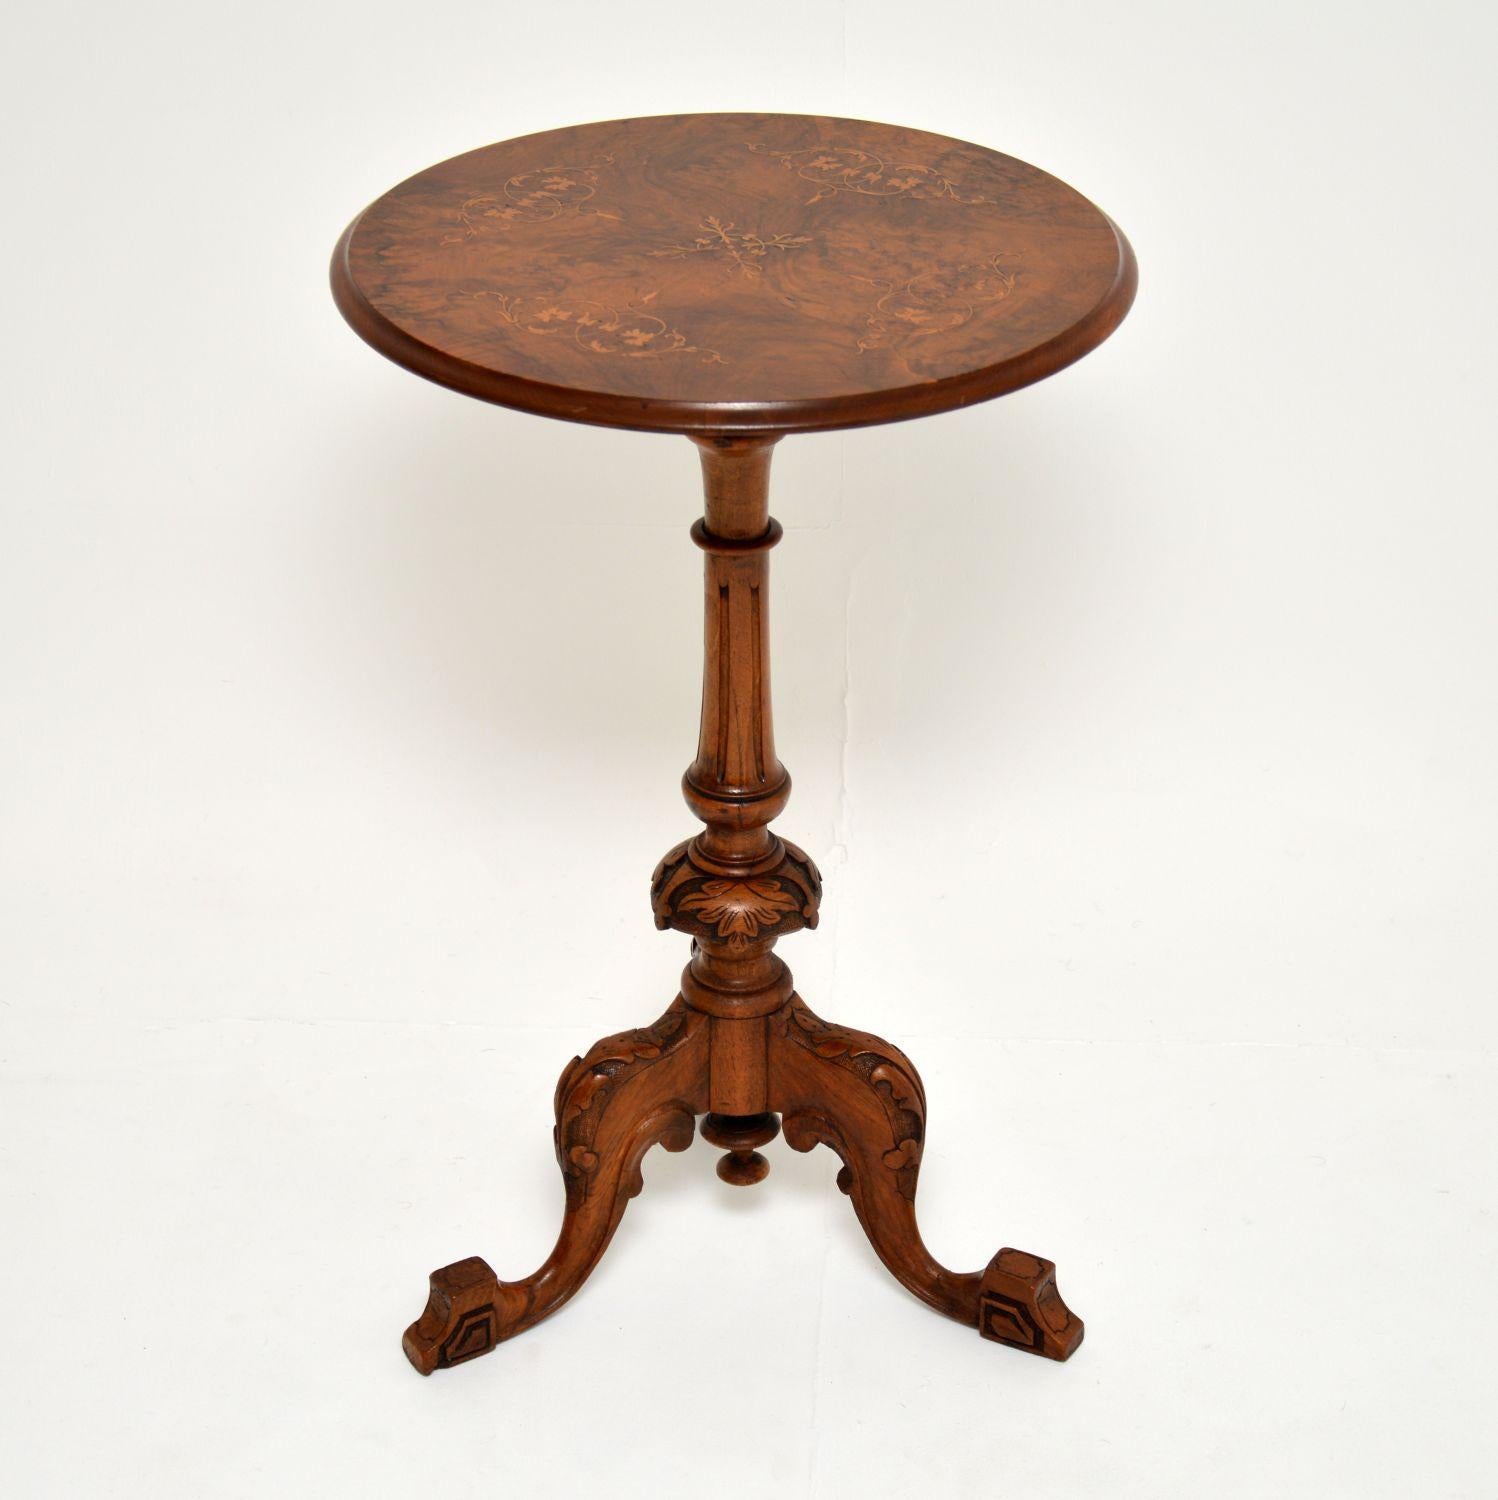 A stunning antique Victorian side table, this dates from circa 1860-1880 period.

This is of amazing quality, the circular top has beautiful burr walnut grain patterns, and is finely inlaid with satinwood Marquetry.

The tripod base is